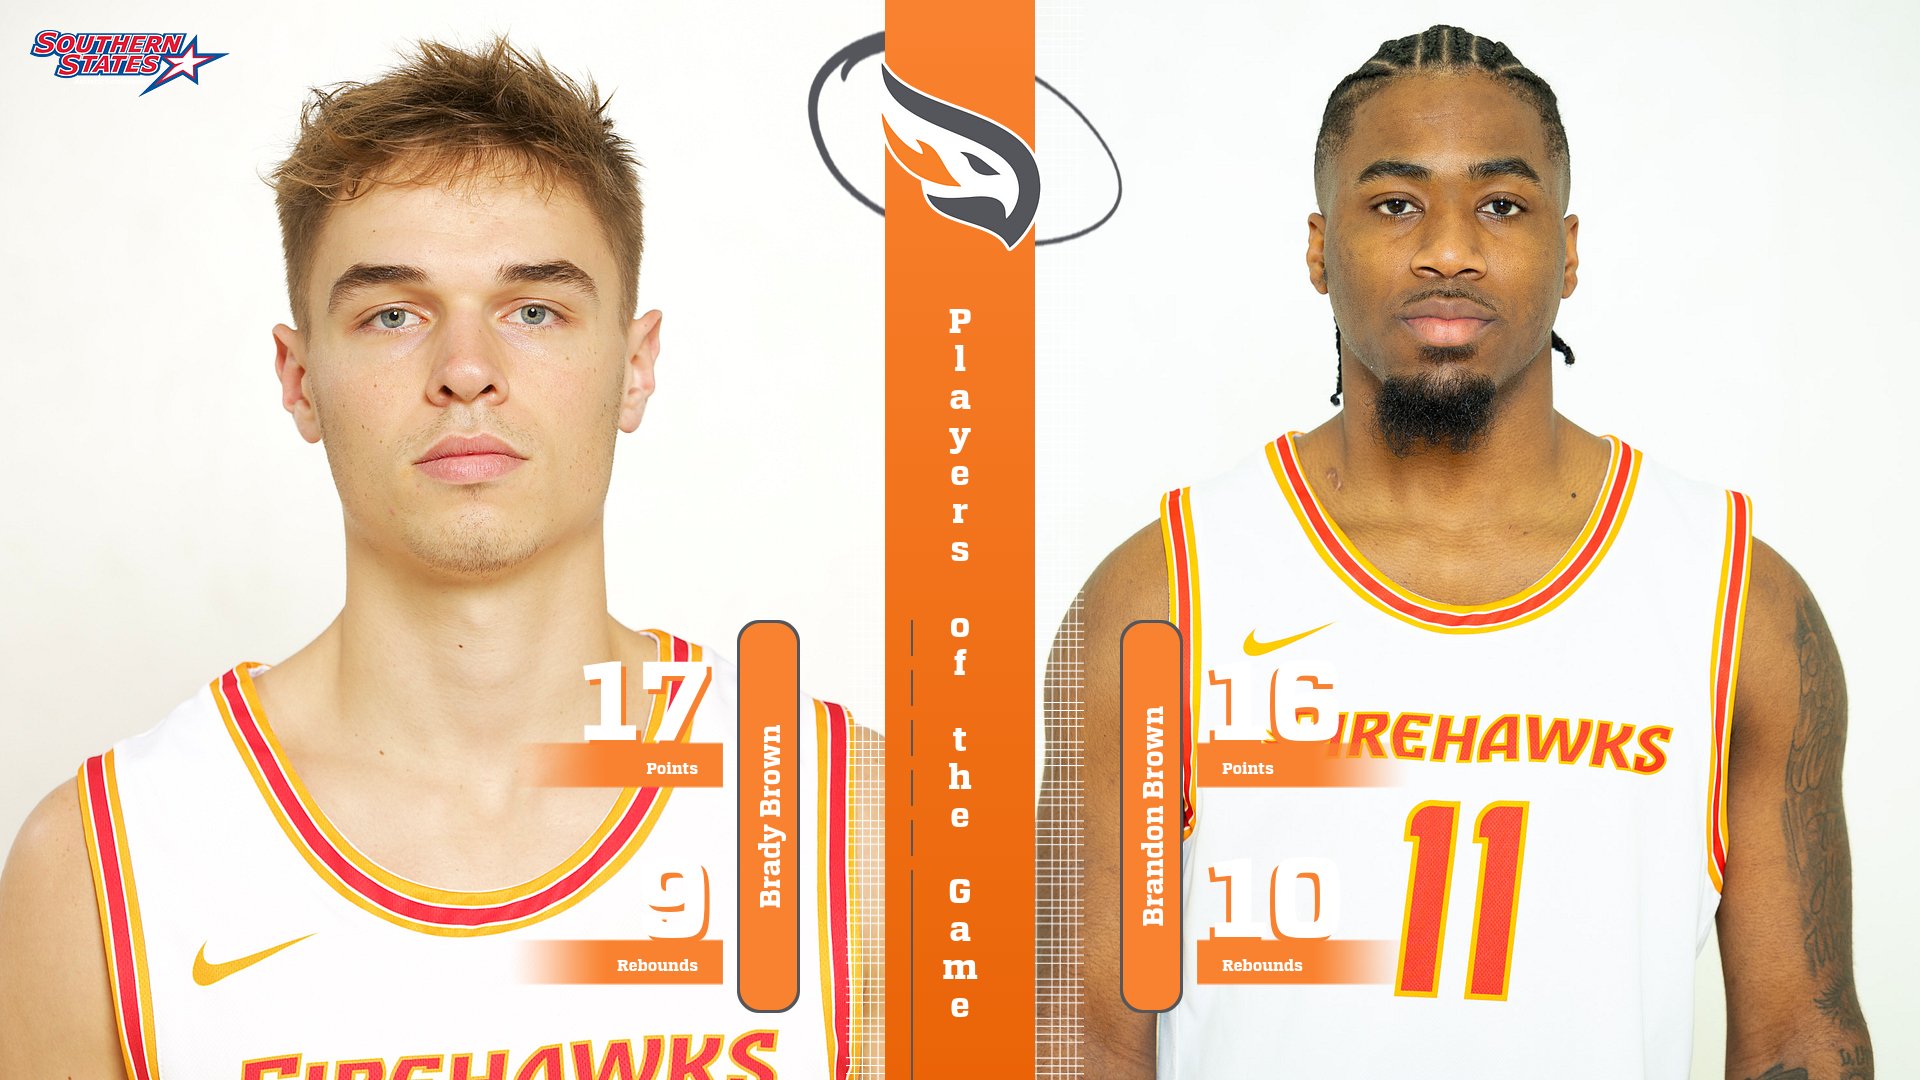 Hudson and Brown Sign Their Names in the Firehawk Record Book, #12 UT Southern Thwart Thomas